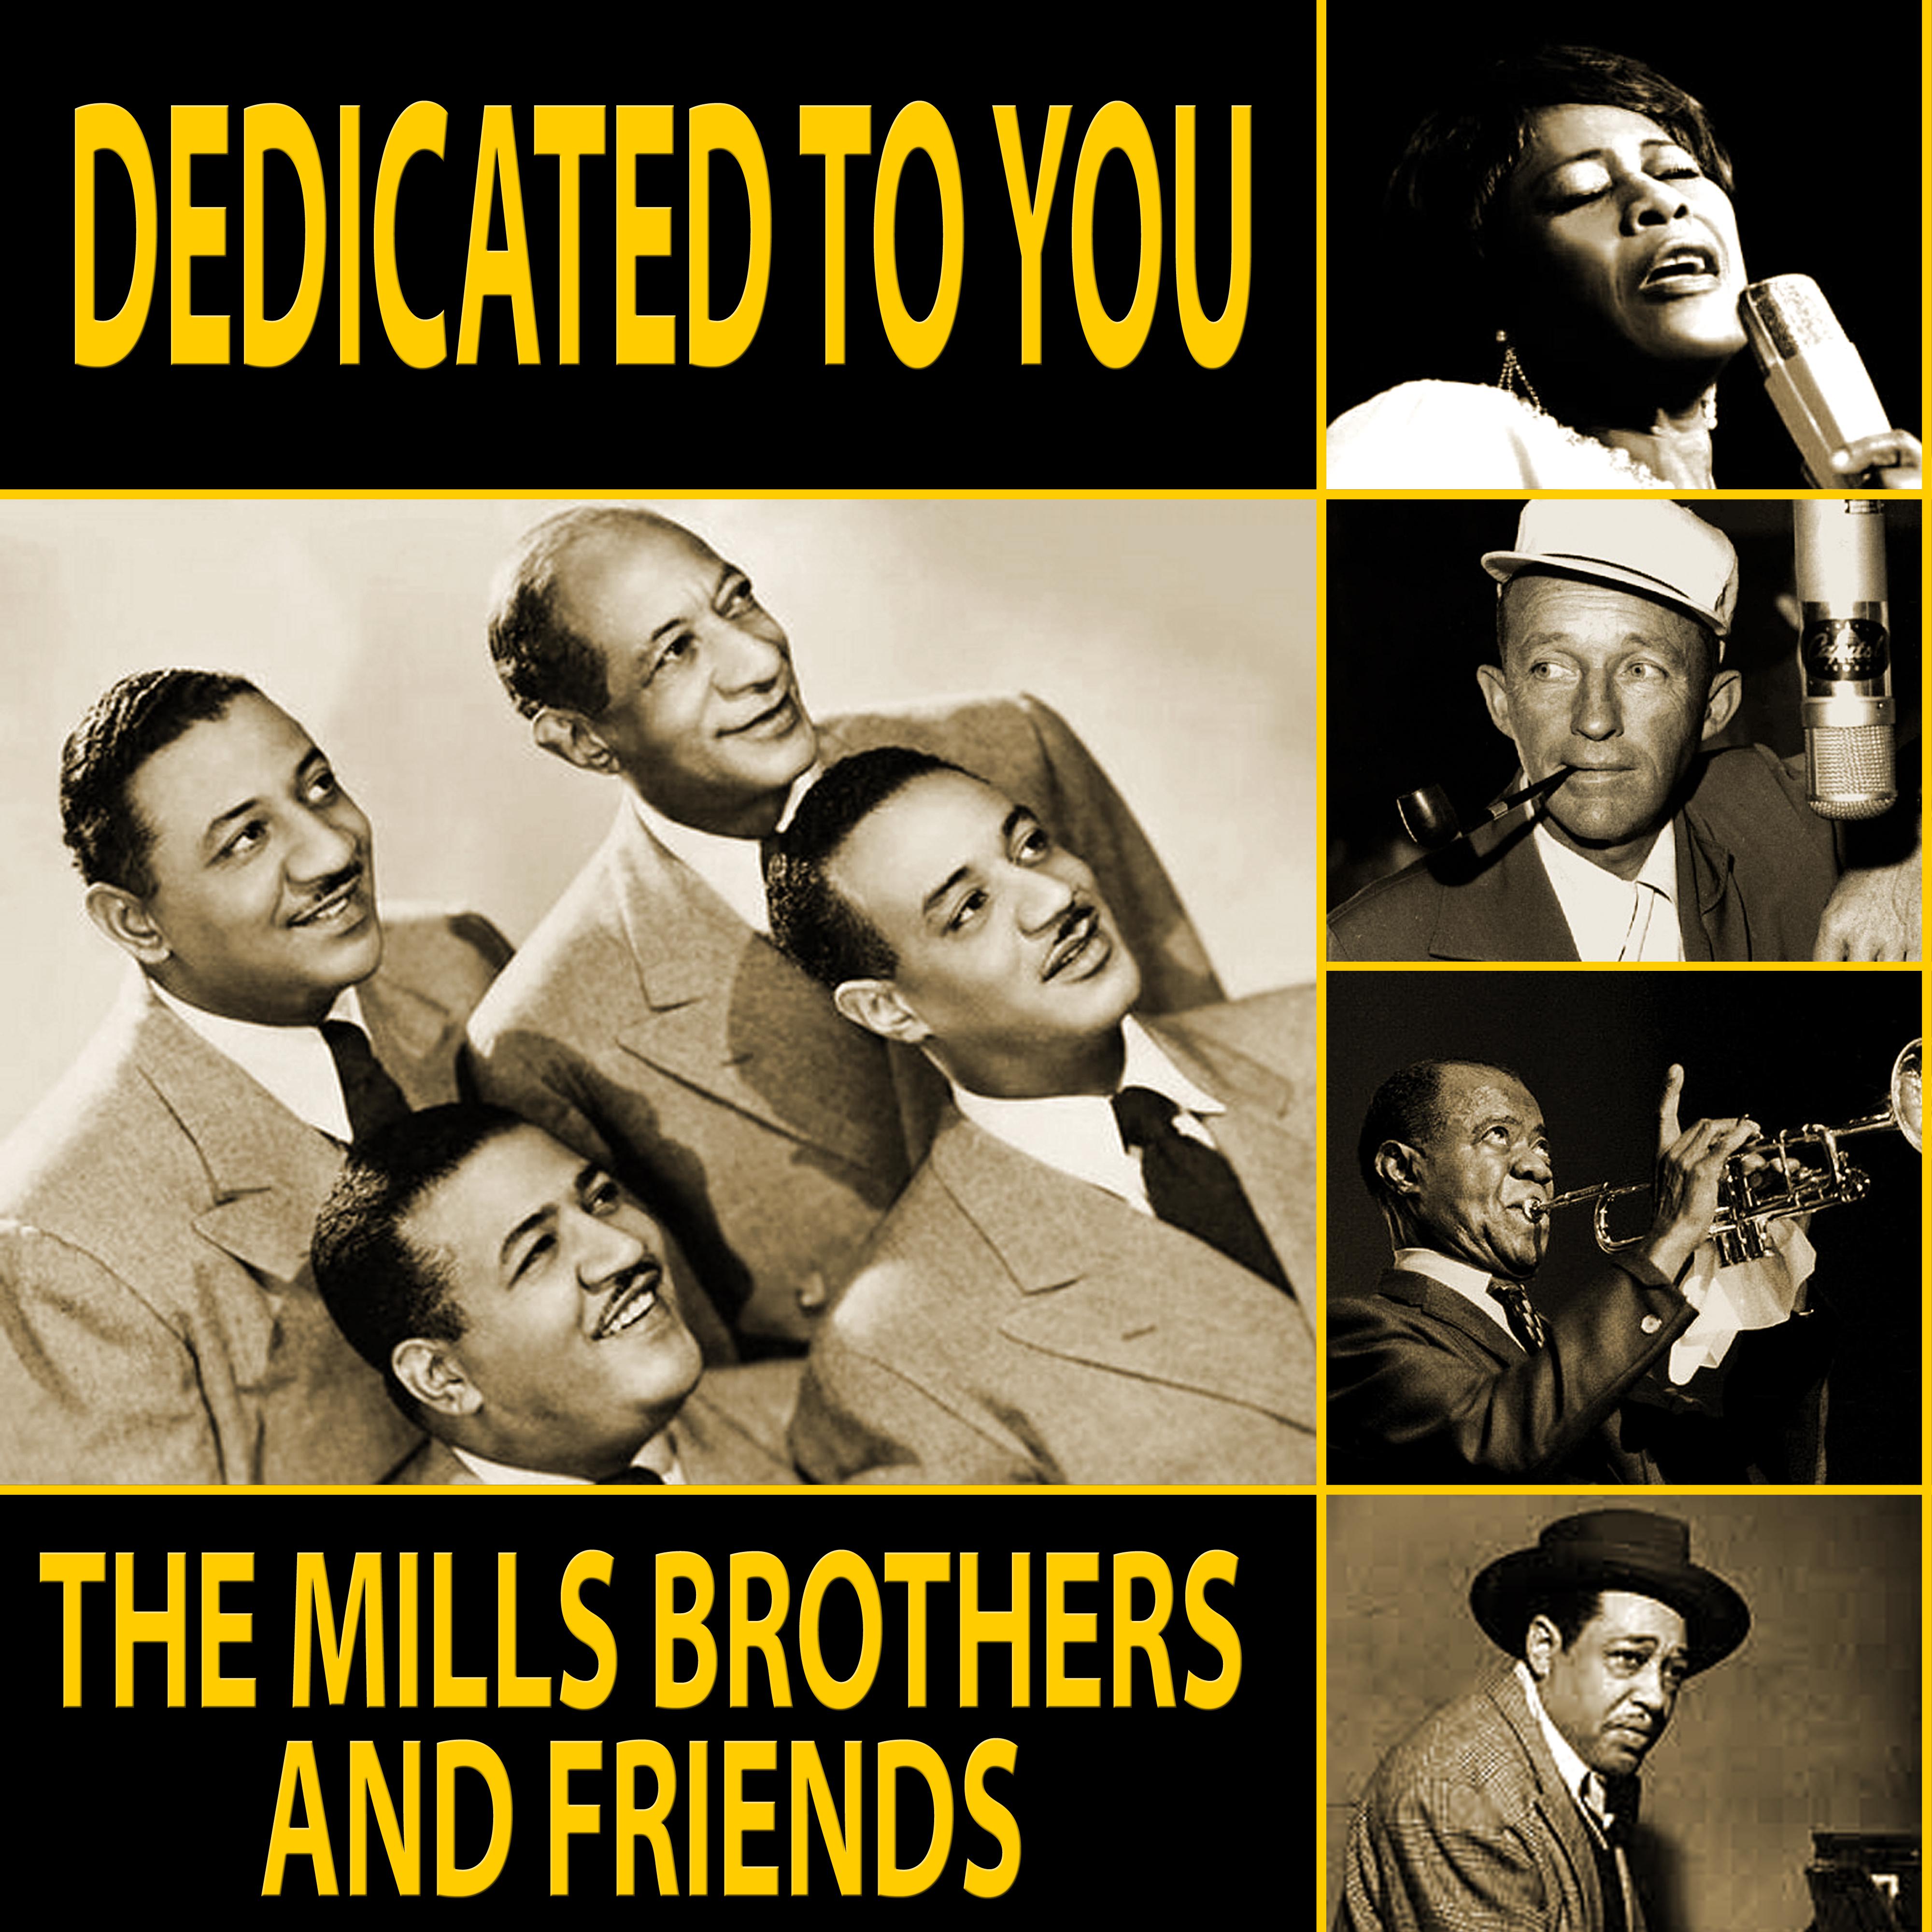 Dedicated to You - The Mills Brothers and Friends